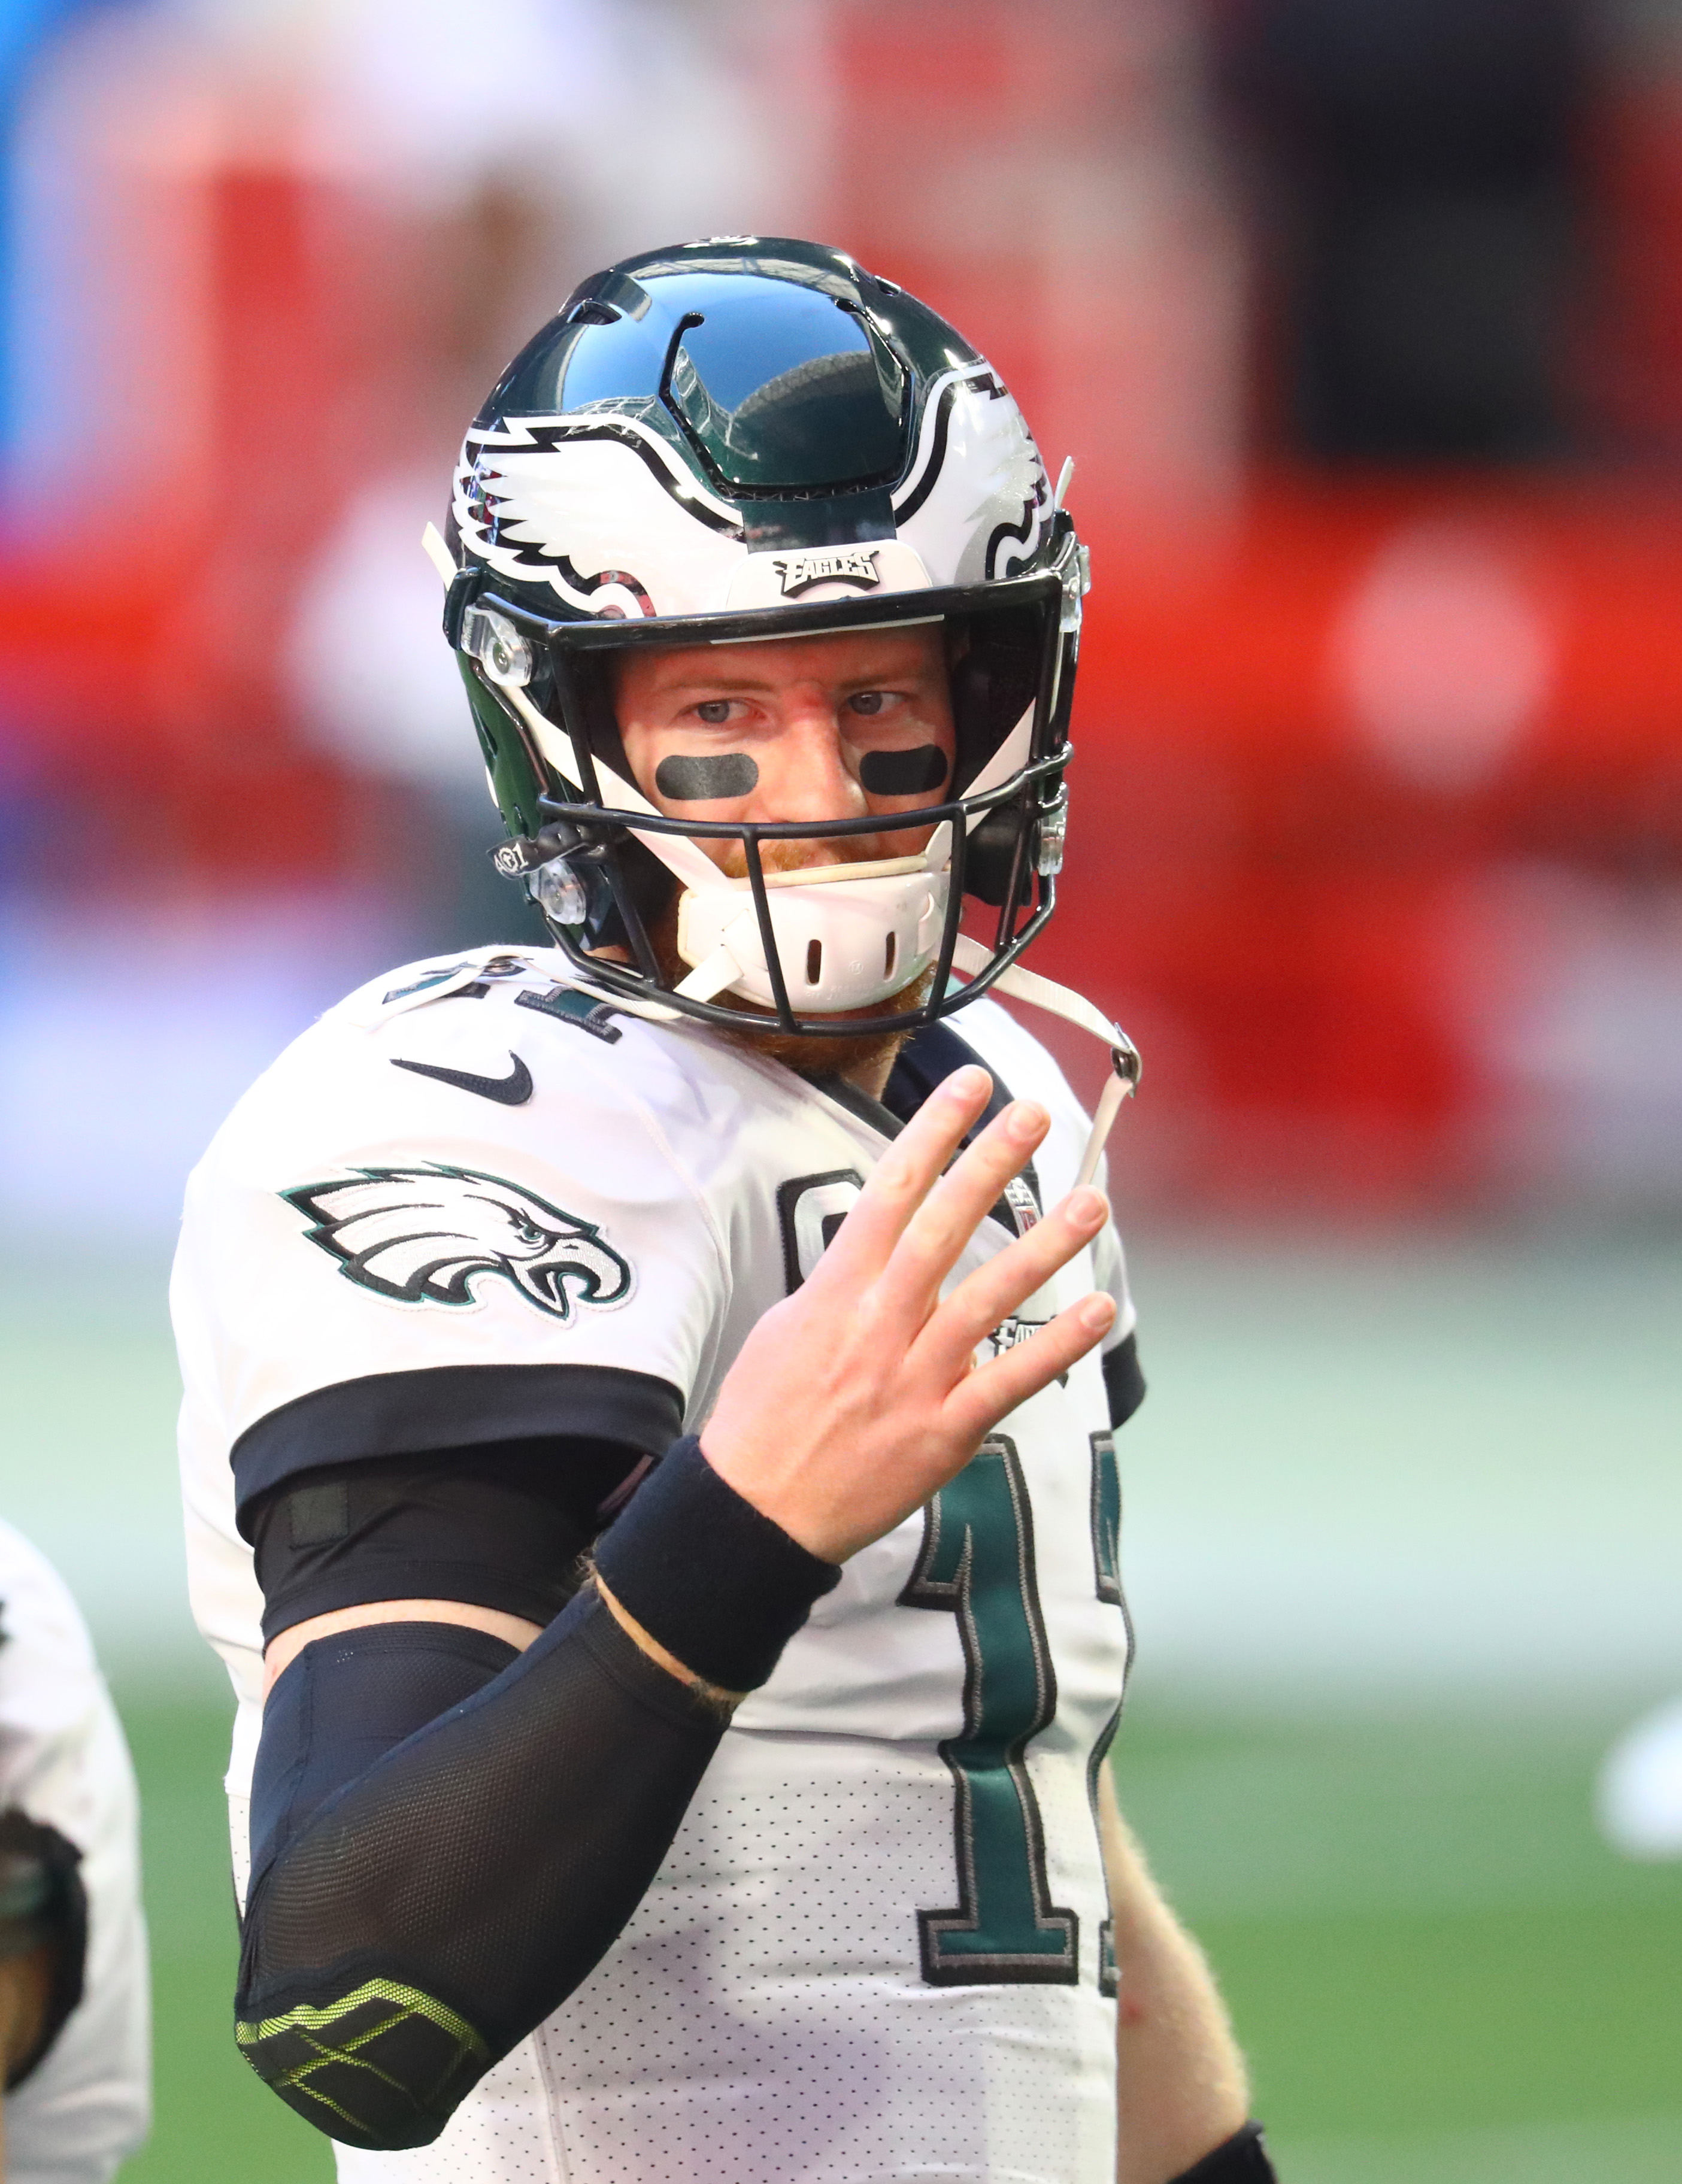 Carson Wentz puts in career-best performance, but Colts fall to